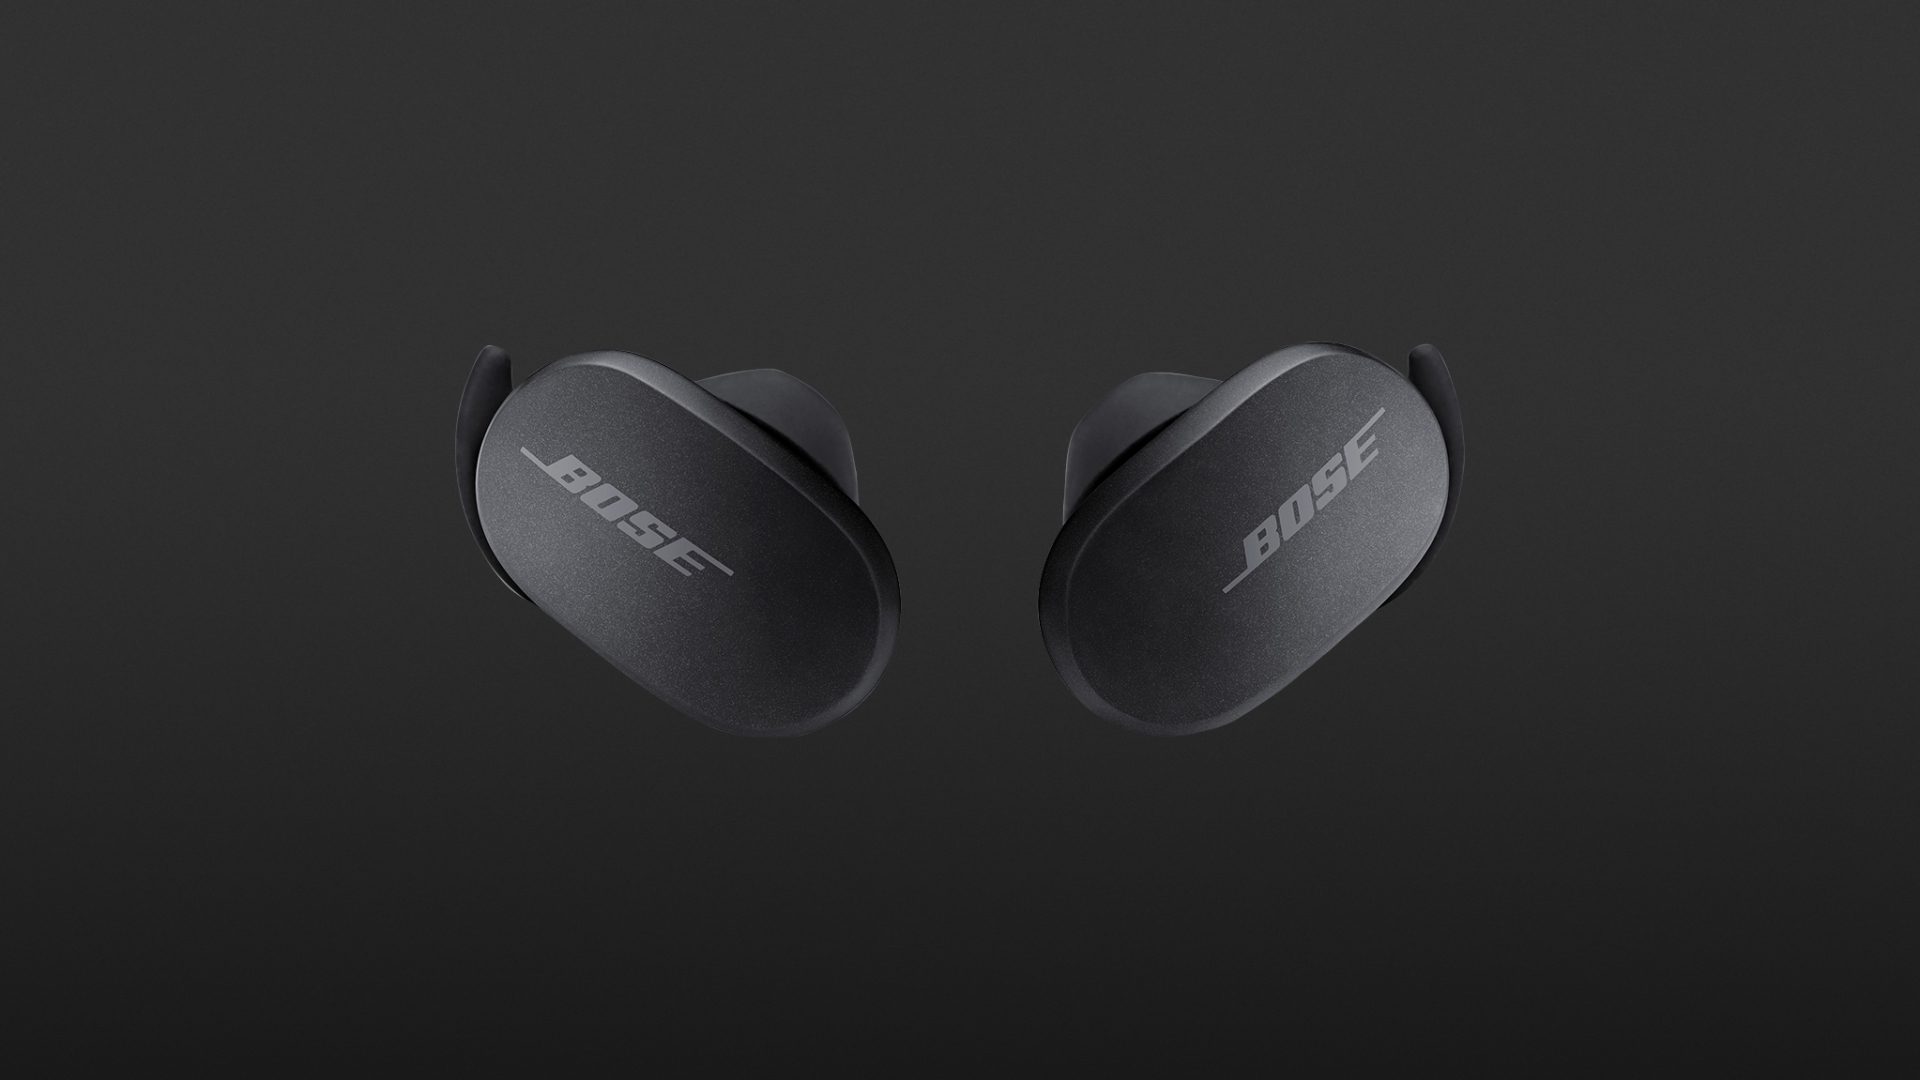 Bose ultra open earbuds. Bose QUIETCOMFORT Earbuds. Bose QUIETCOMFORT Ultra. Bose QUIETCOMFORT Ultra Earbuds. Bose картинка.